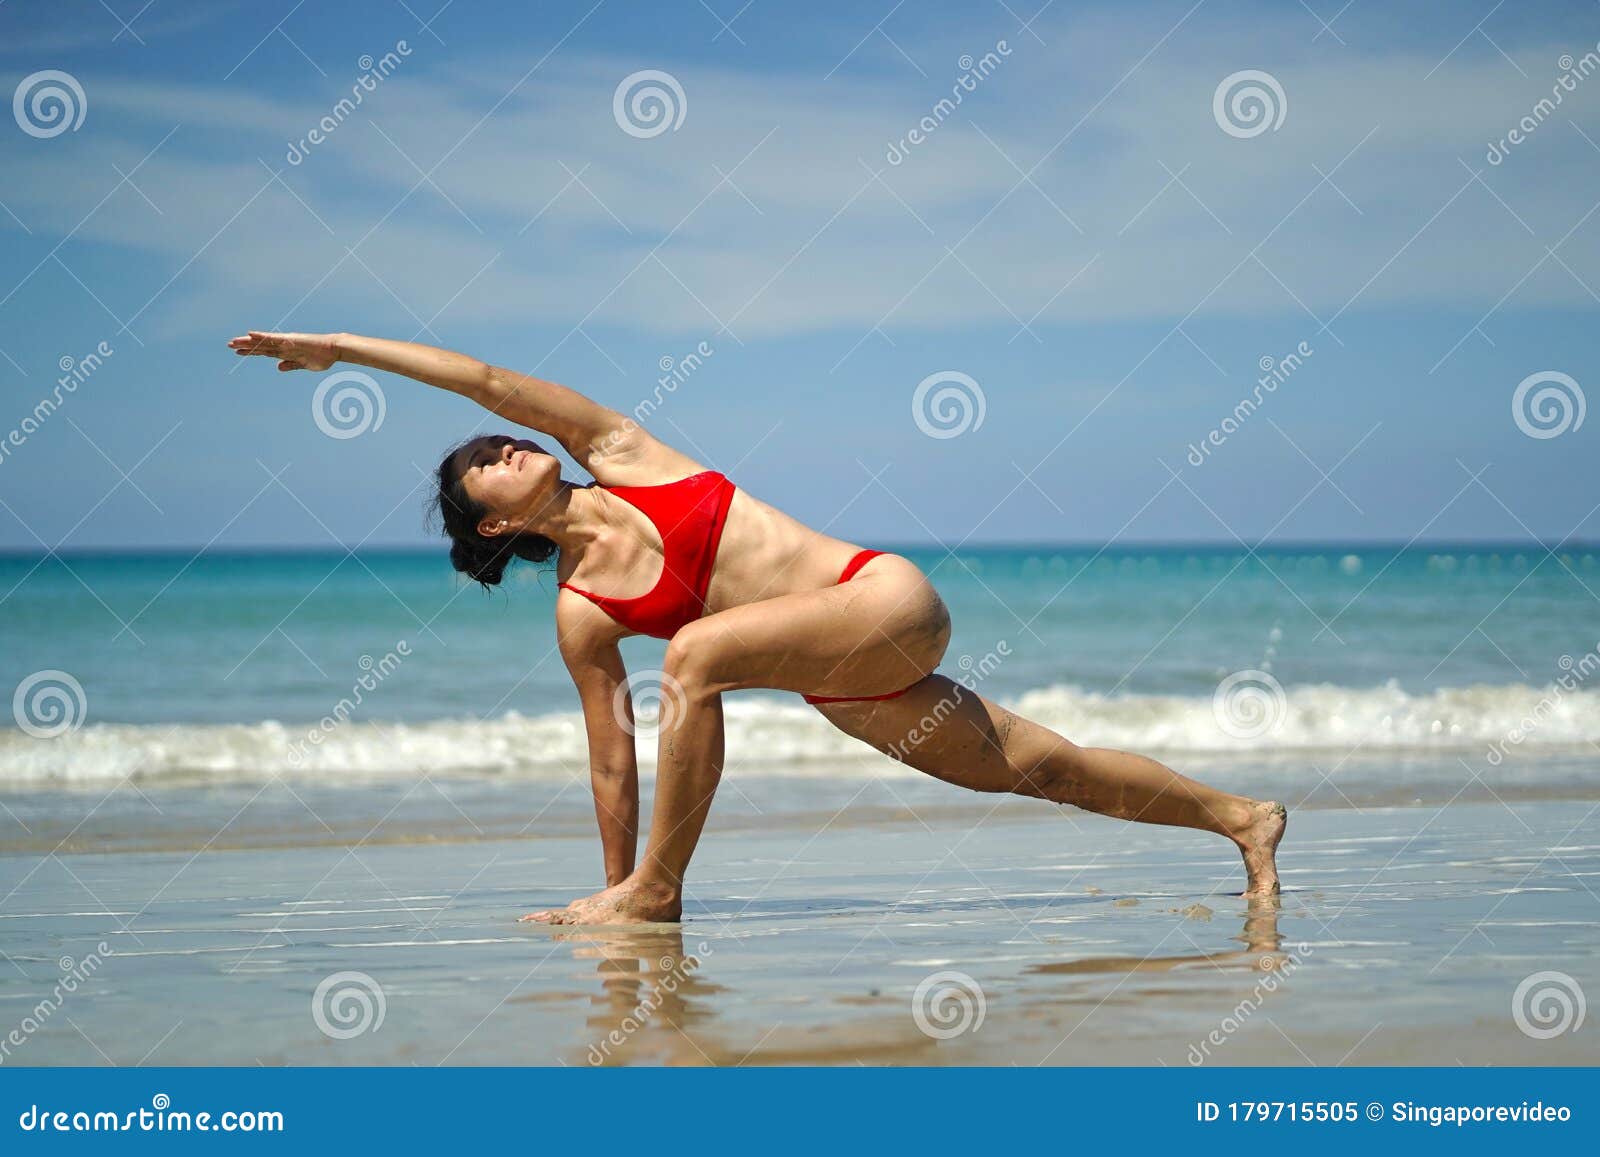 https://thumbs.dreamstime.com/z/asian-chinese-woman-various-yoga-poses-beach-blue-water-landscape-format-179715505.jpg